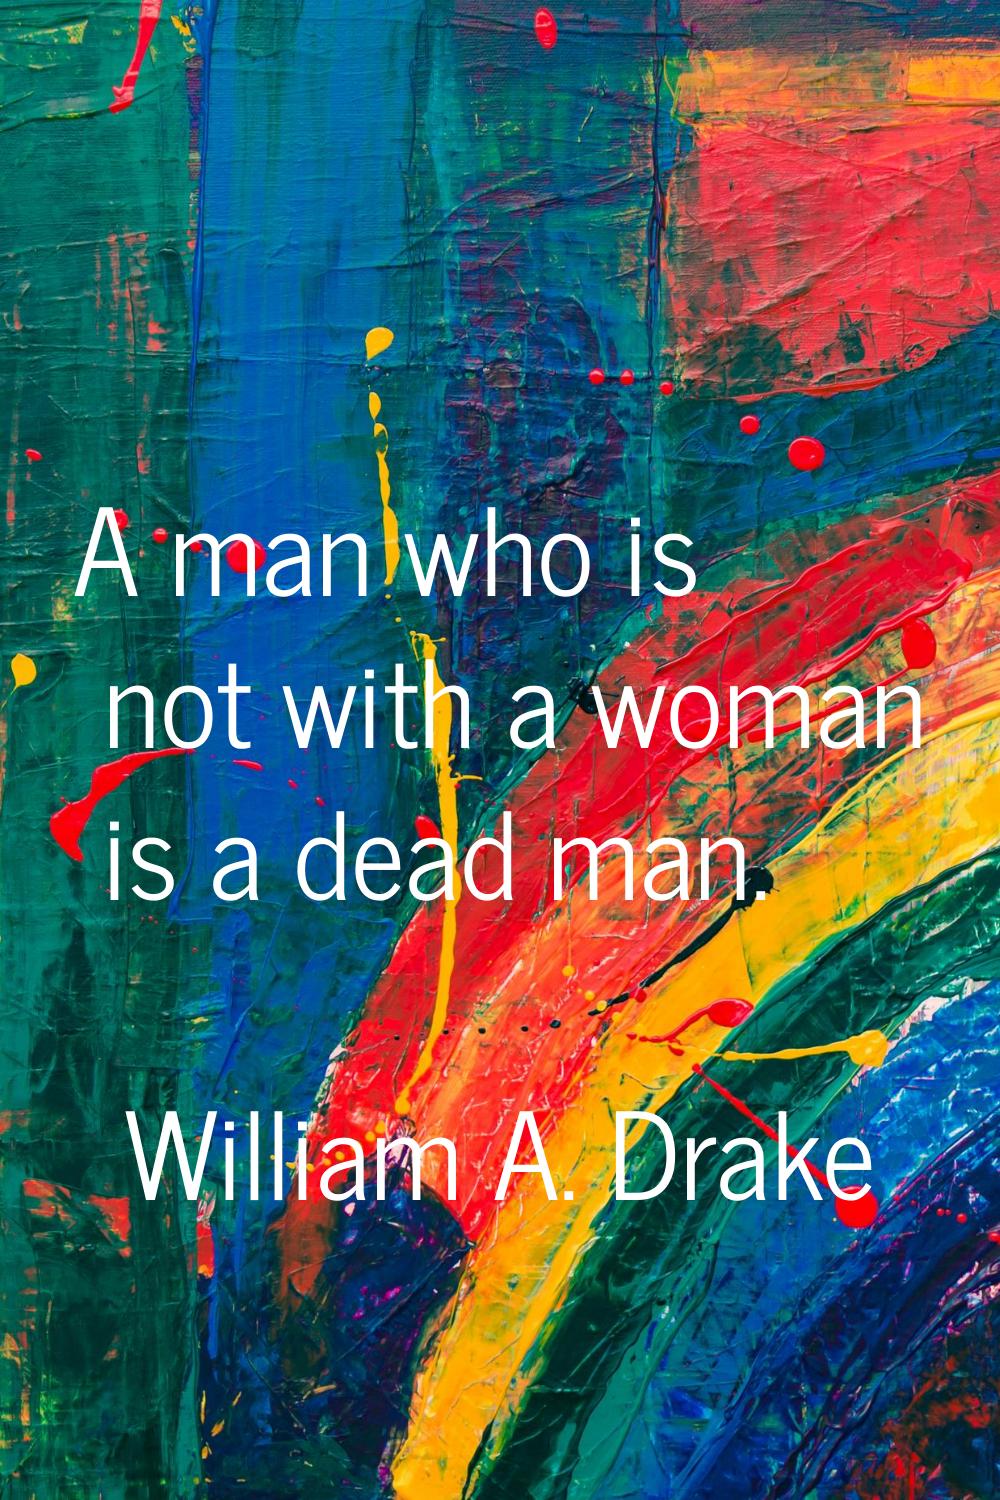 A man who is not with a woman is a dead man.